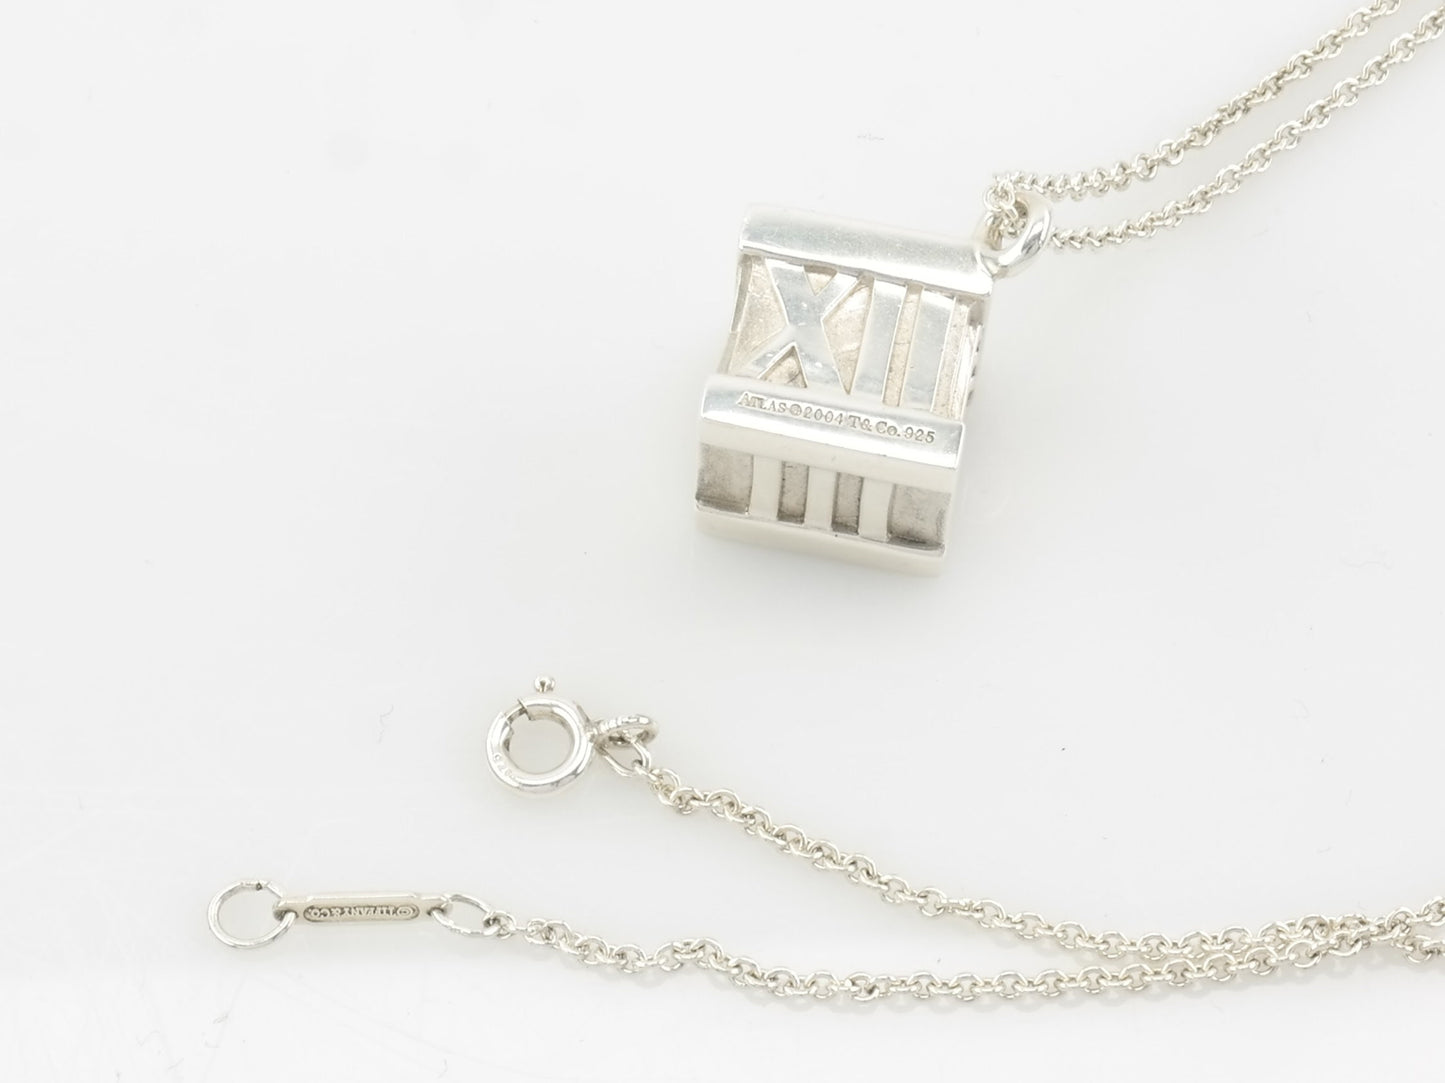 Vintage Tiffany & Co Sterling Silver Large Atlas Cube Necklace